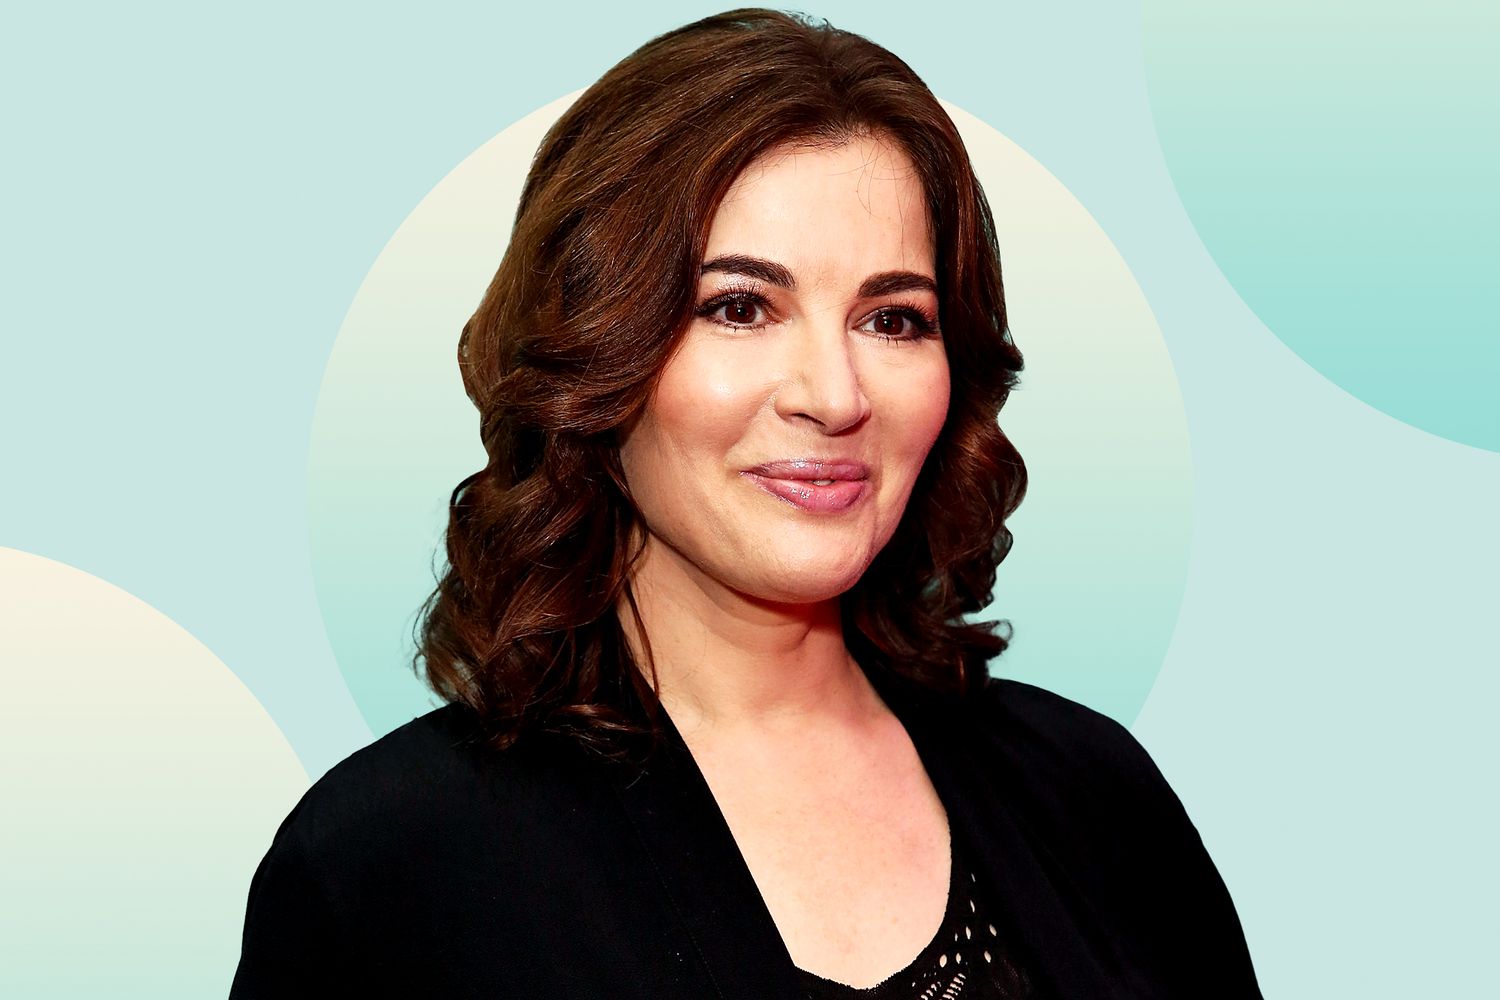 Nigella Lawson's 6-Ingredient Cauliflower Soup Is Packed with Anti-Inflammatory Ingredients—and Fans Say It's "Divine"